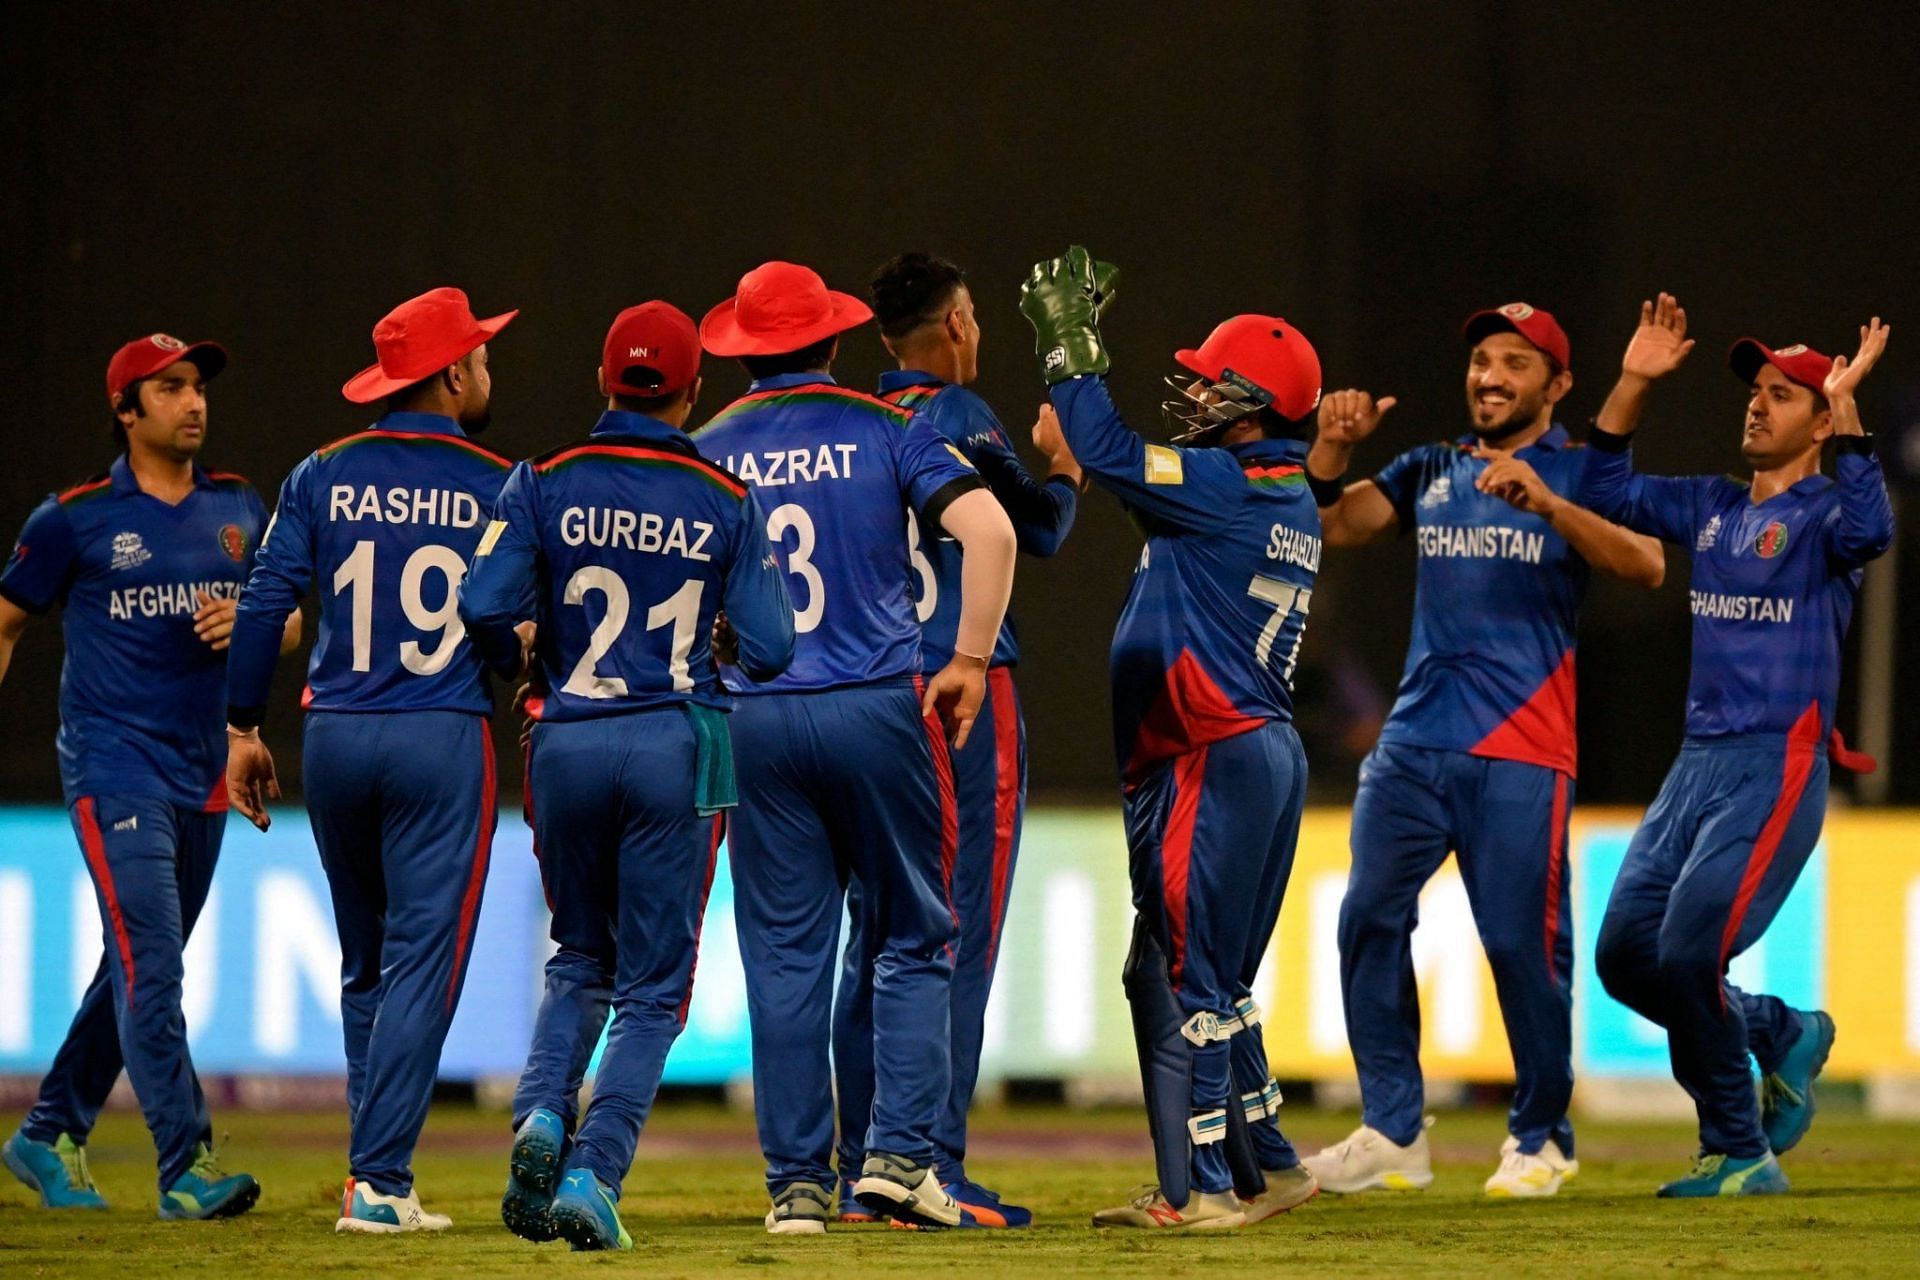 Afghanistan knocked over Scotland by 130 runs on Monday [Image- Twitter]